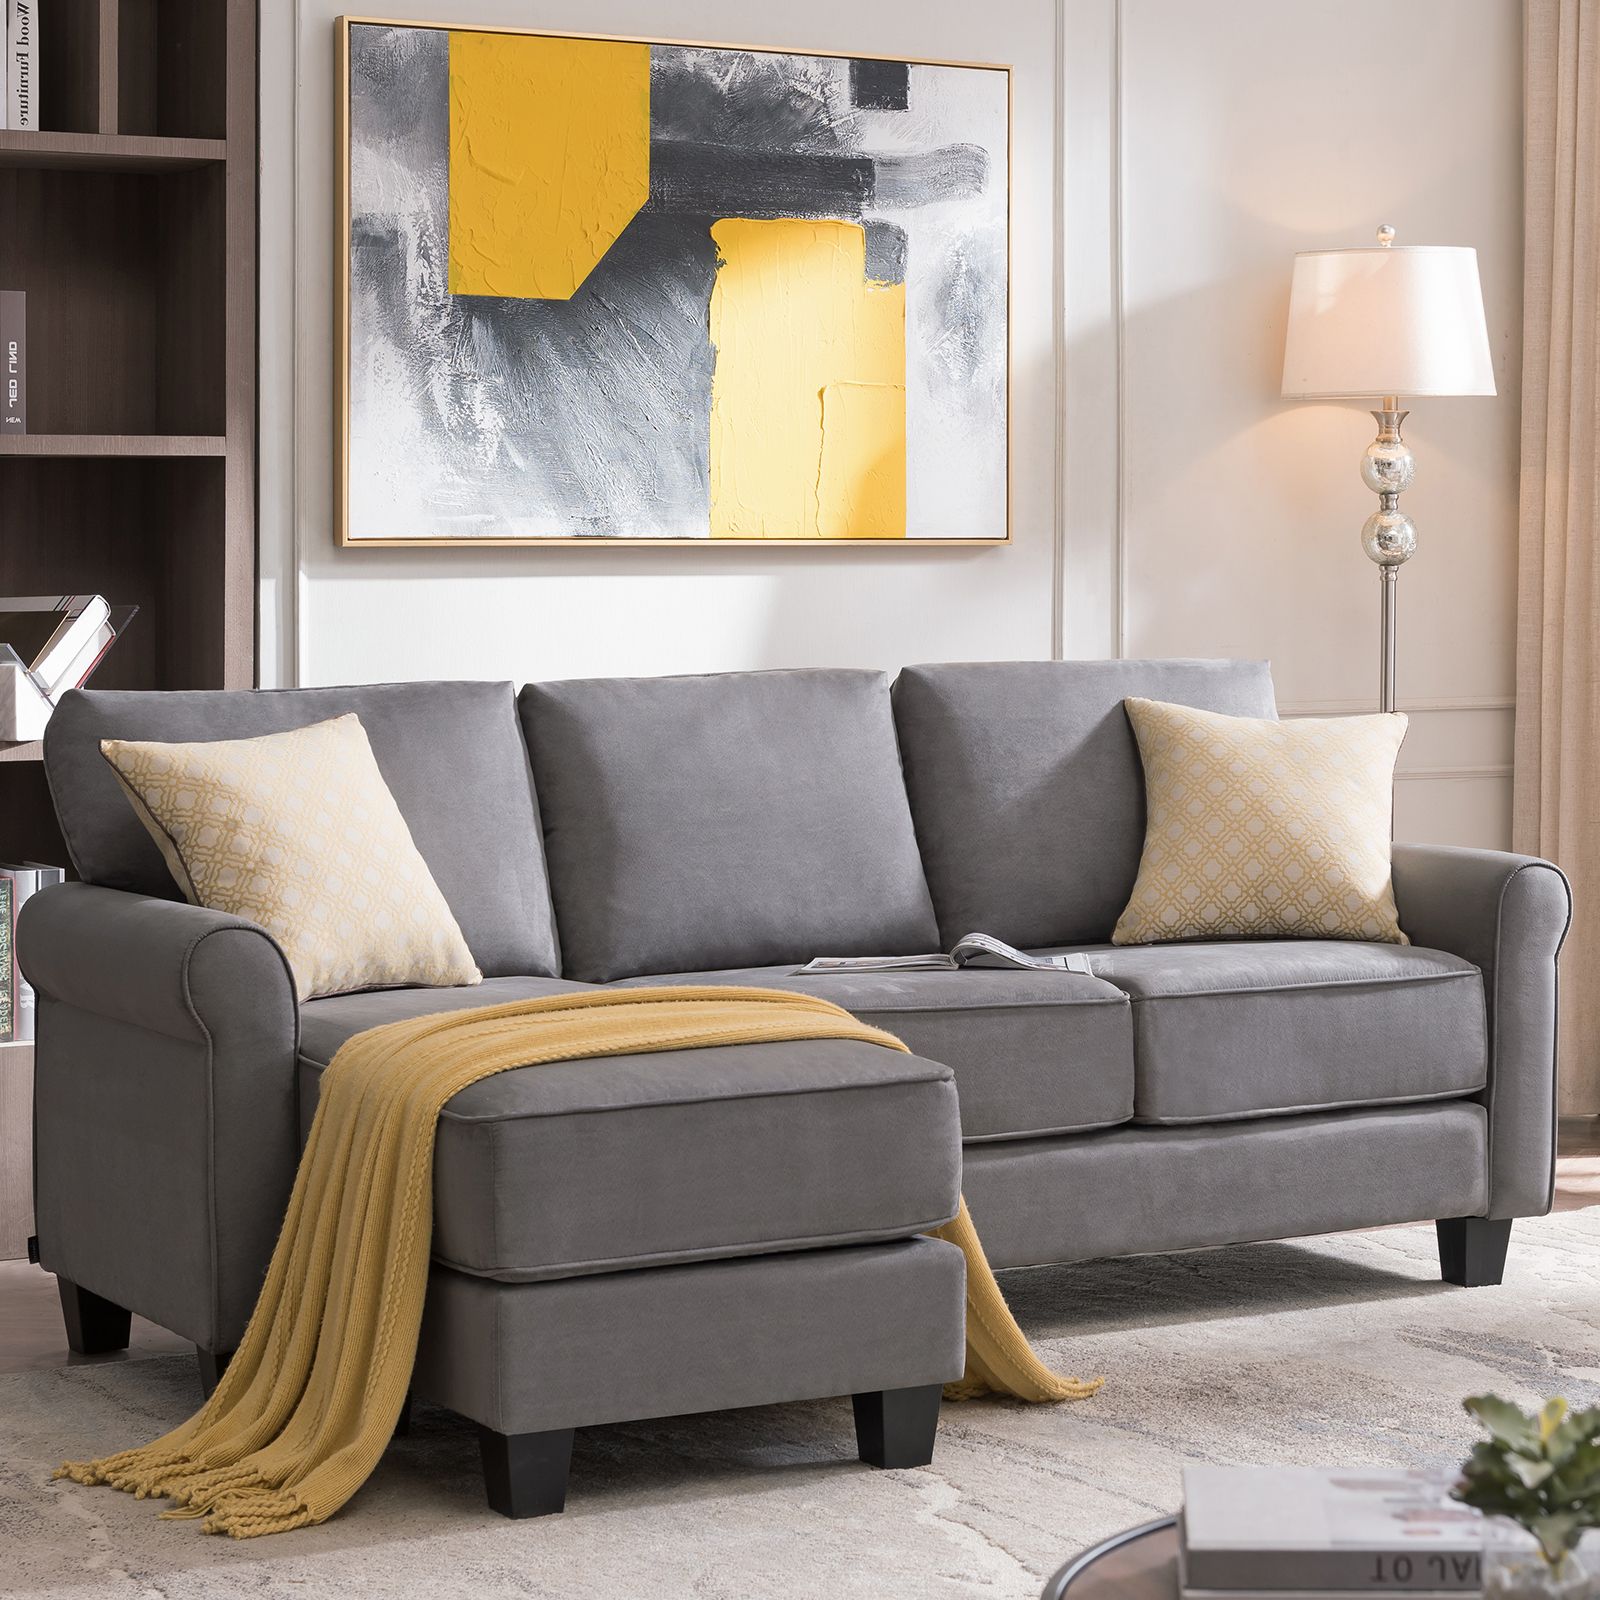 Fashionable Sectional Sofa Convertible Couch L Shape Sofa Couch 3 Seat Dusty Grey Regarding 3 Seat Convertible Sectional Sofas (View 2 of 15)